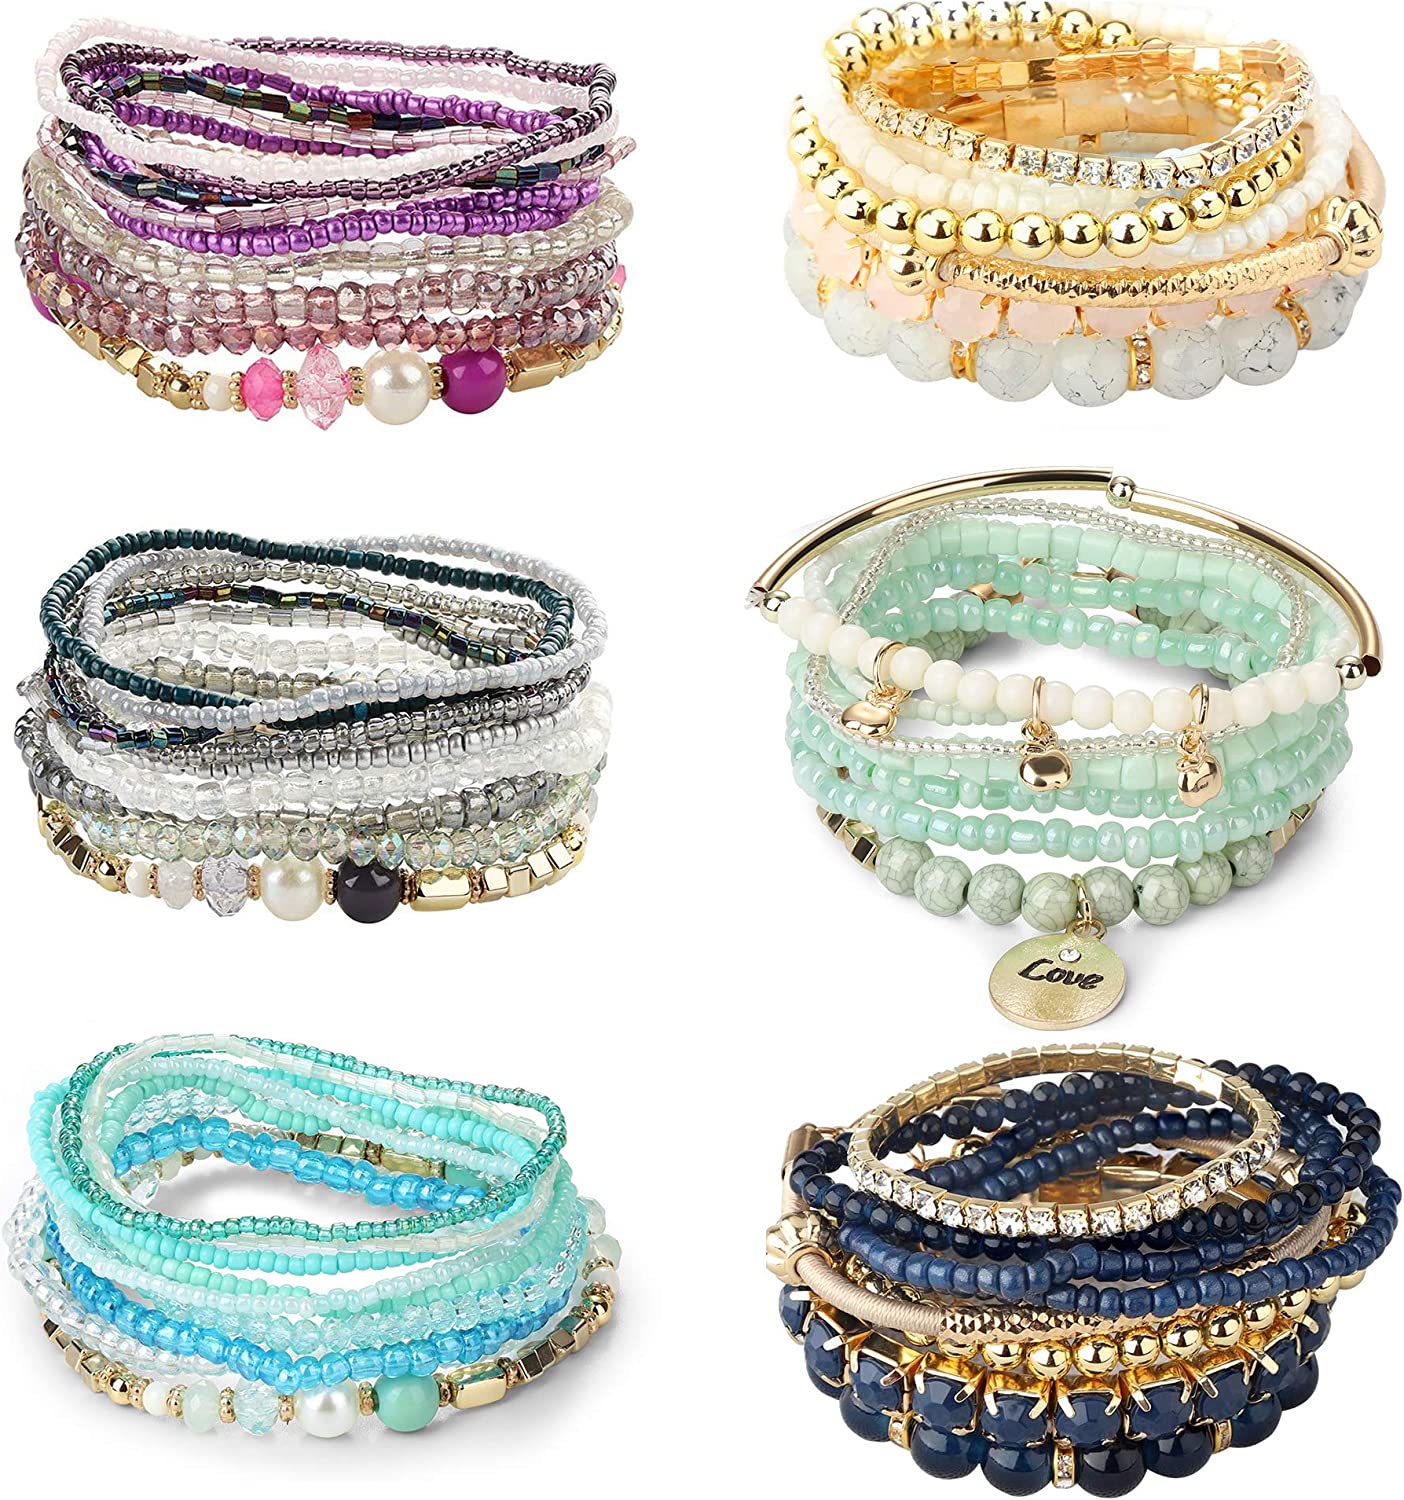 LOYALLOOK 6 Sets Bohemian Stackable Bead Bracelets for Women Stretch  Bohemian Style Stretch Multilayered Boho Bracelet Set - E-COMMERCE BUSINESS  WITH ASIA EASY WAY TO BRING PRODUCTS AMERICAN MARKETS